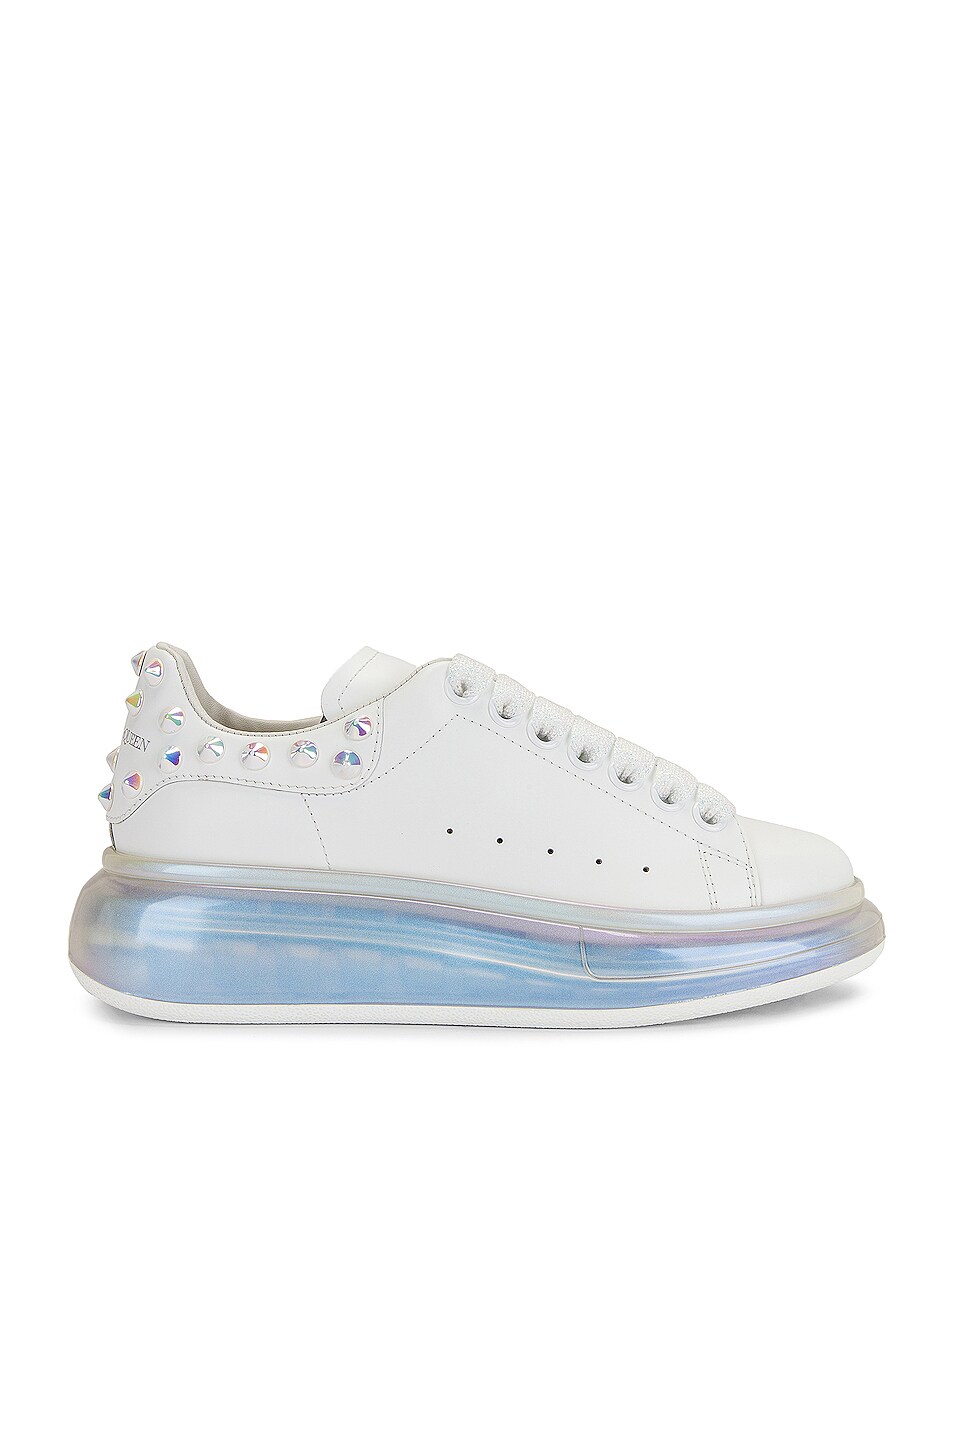 Image 1 of Alexander McQueen Leather Studs Sneakers in White & Pearl